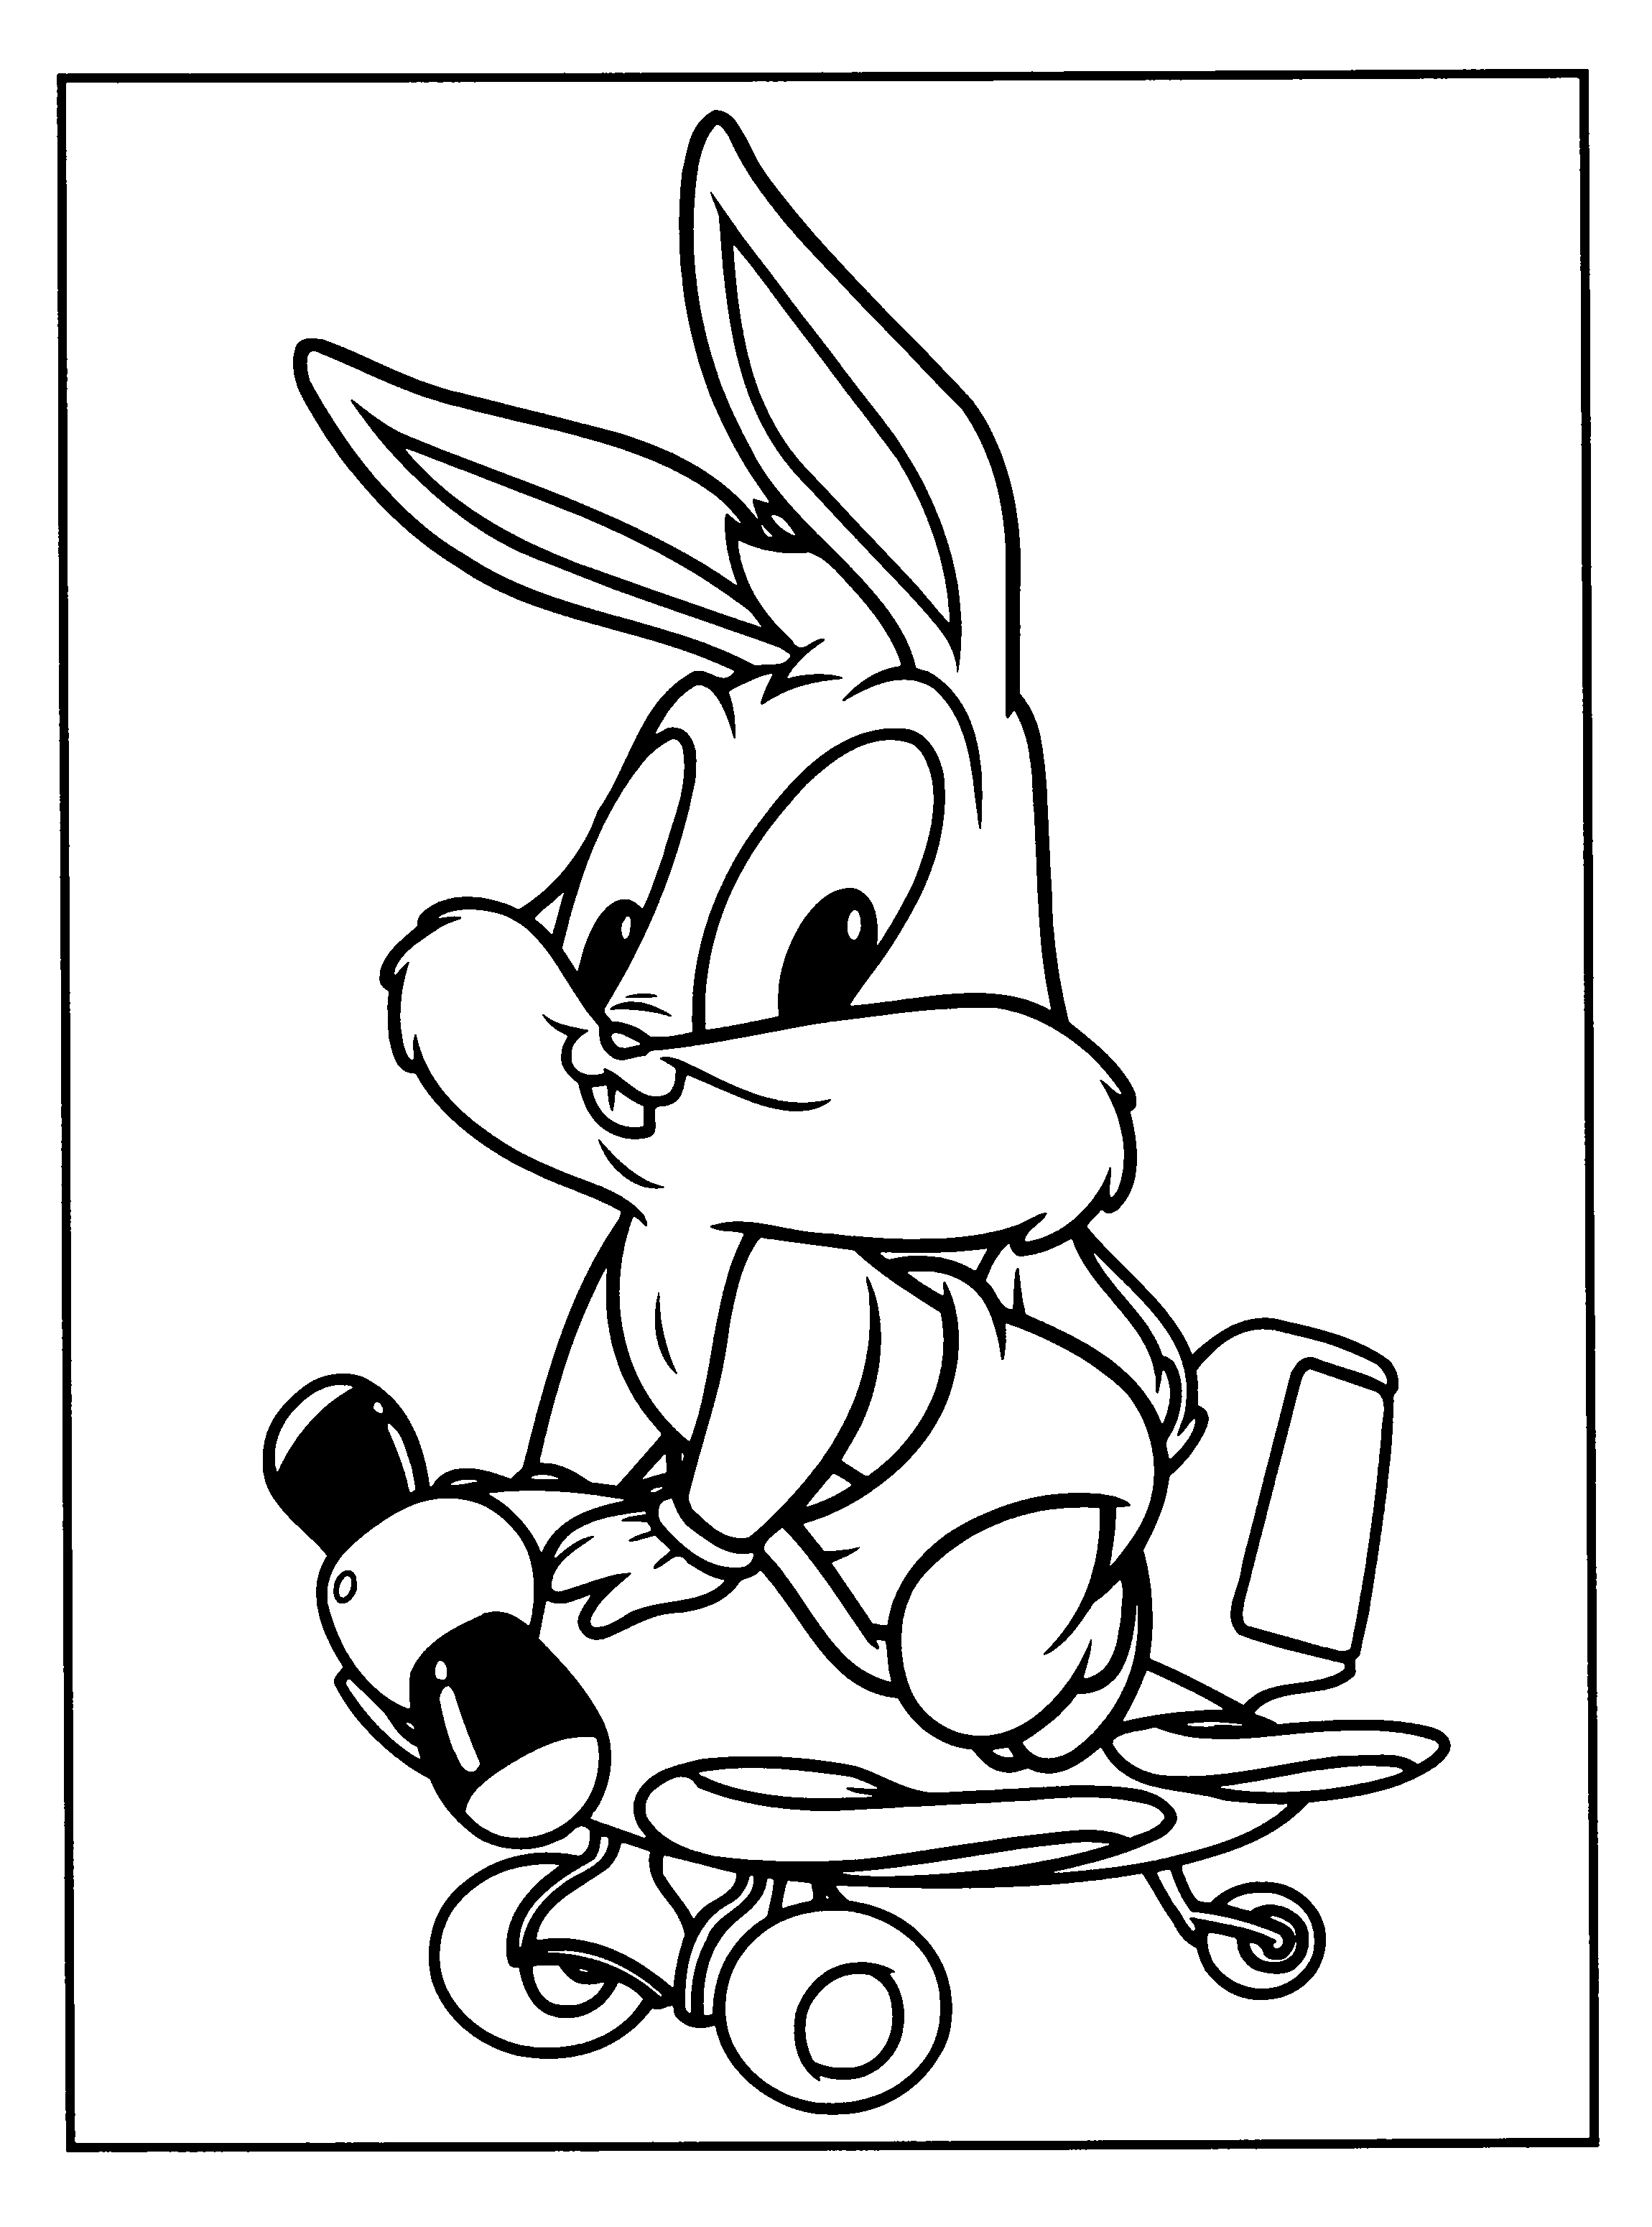 Baby looney tunes Coloring Pages - Coloringpages1001.com